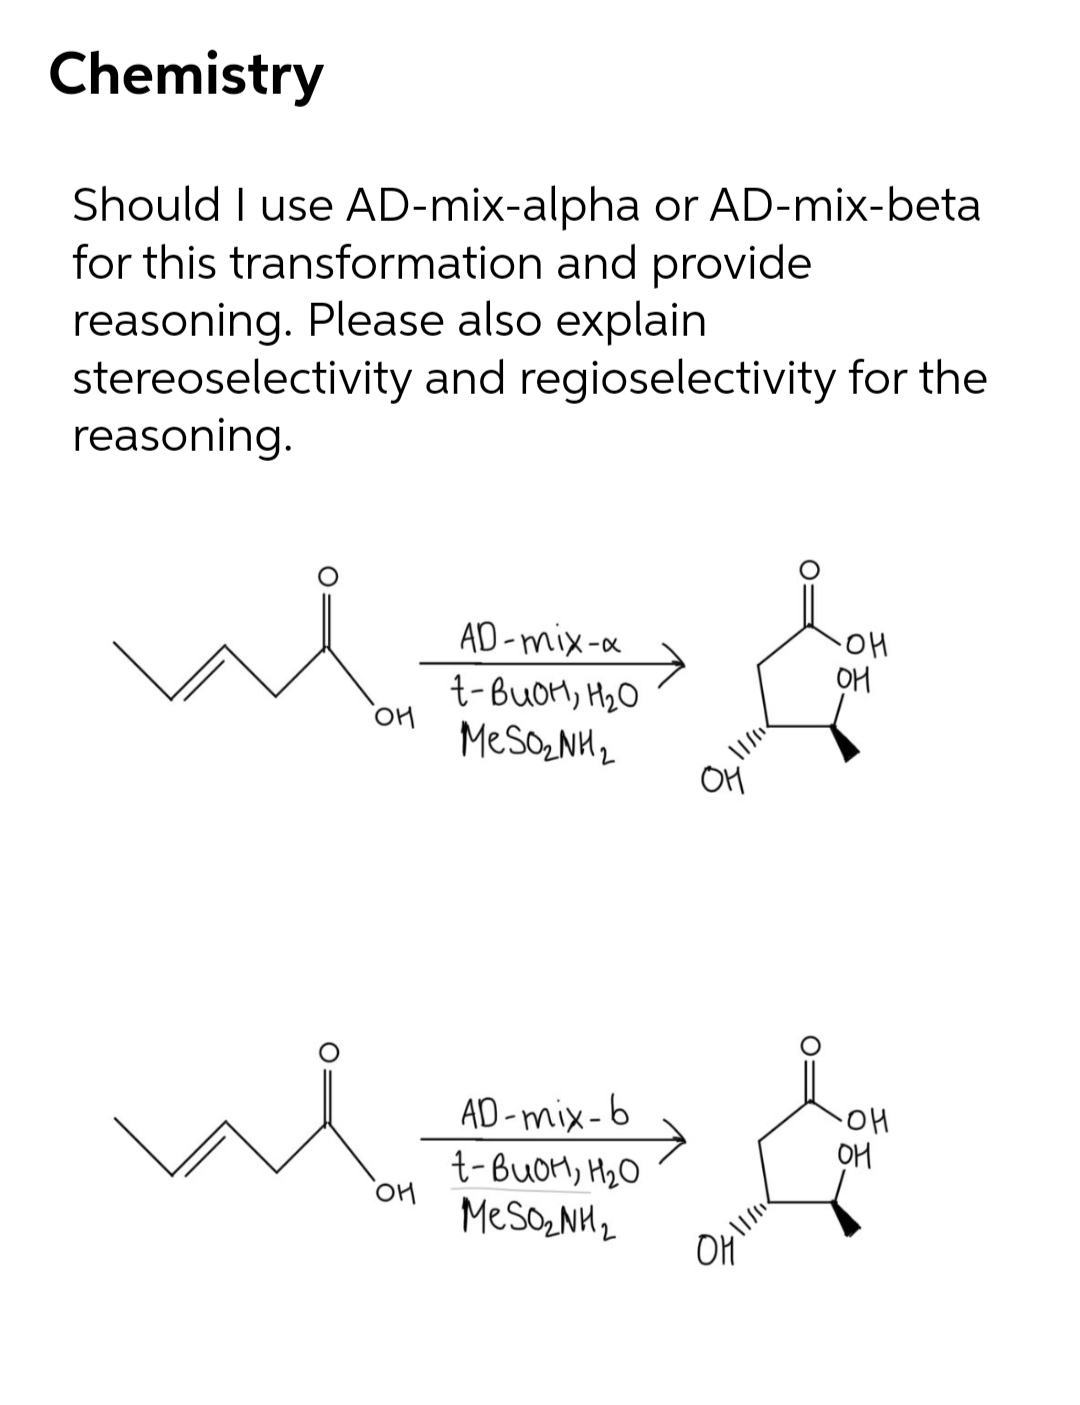 Chemistry
Should I use AD-mix-alpha or AD-mix-beta
for this transformation and provide
reasoning. Please also explain
stereoselectivity and regioselectivity for the
reasoning.
AD-mix-a
t-BUOM, H2O
MeSozNH2
'애
OH
OH
AD -mix-6
HO-
OM
t-BUOM, H2O
MESONH2
OH
